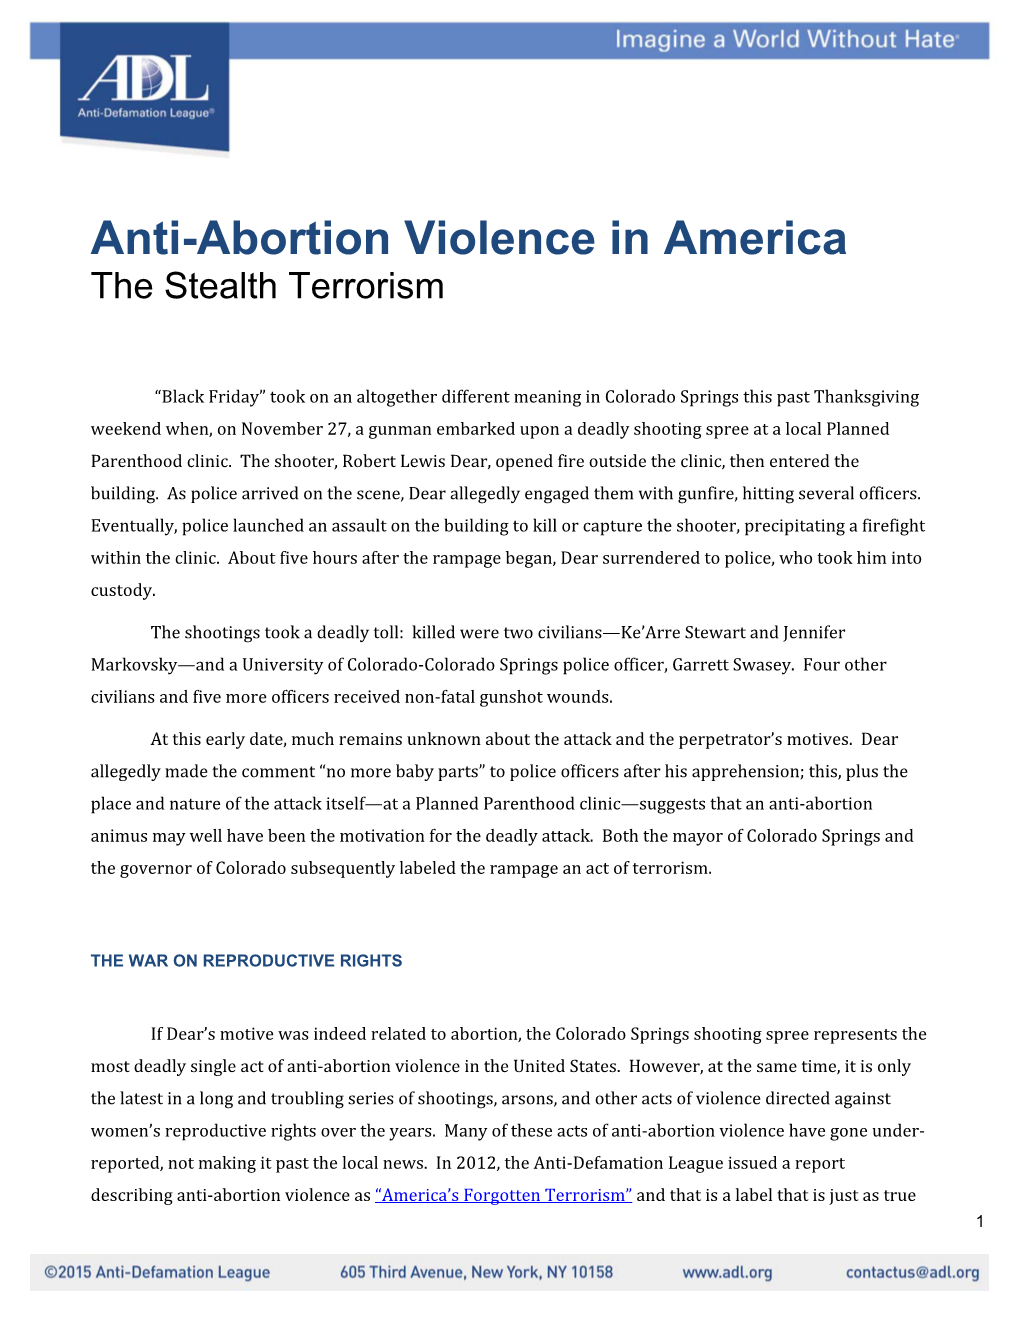 Anti-Abortion Violence in America the Stealth Terrorism